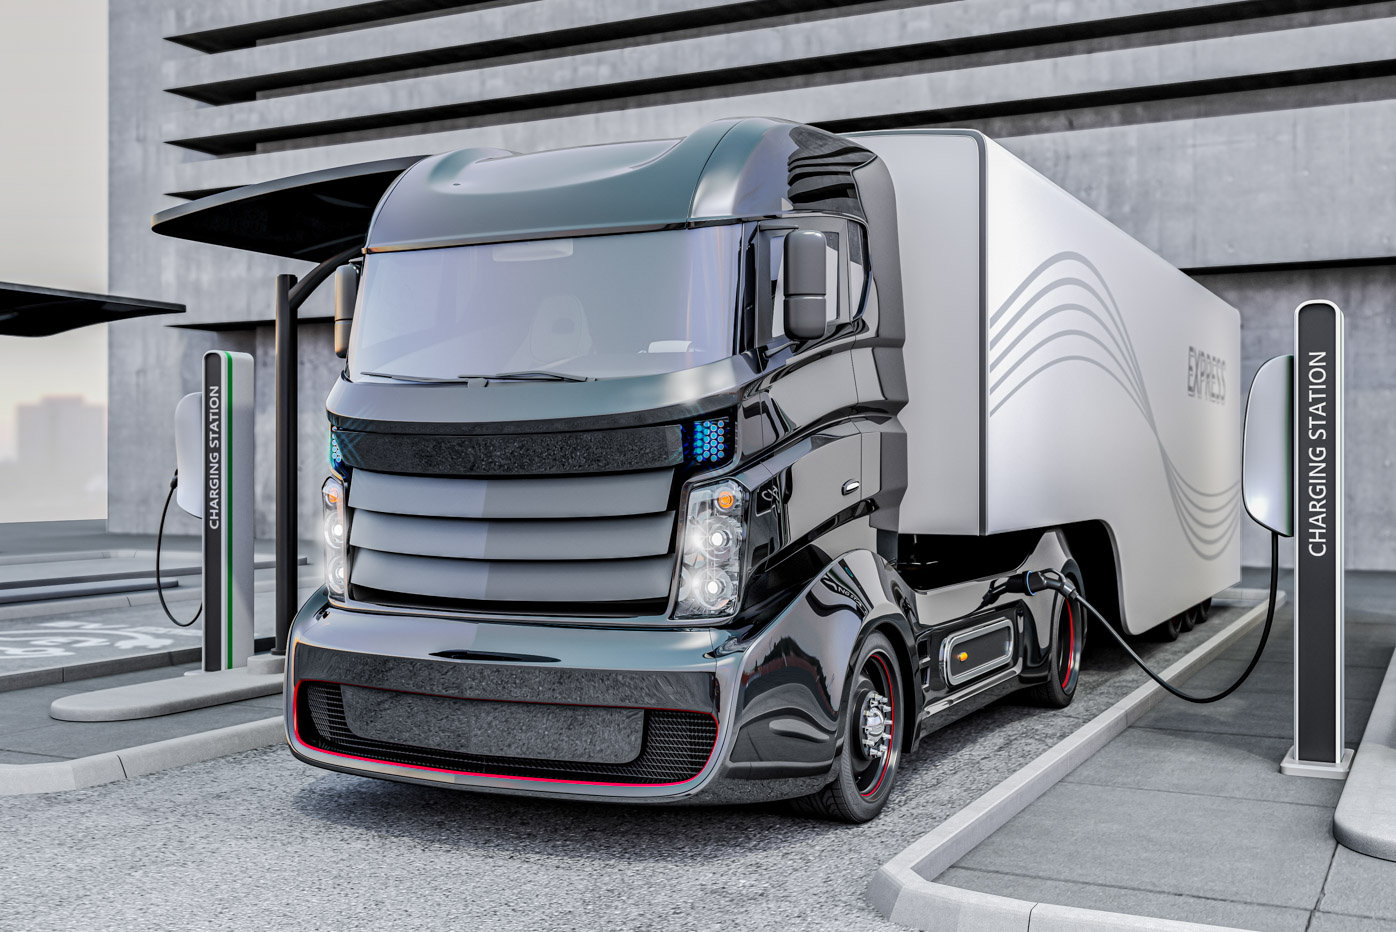 Hybrid electric truck being charging at charging station. 3D rendering image.